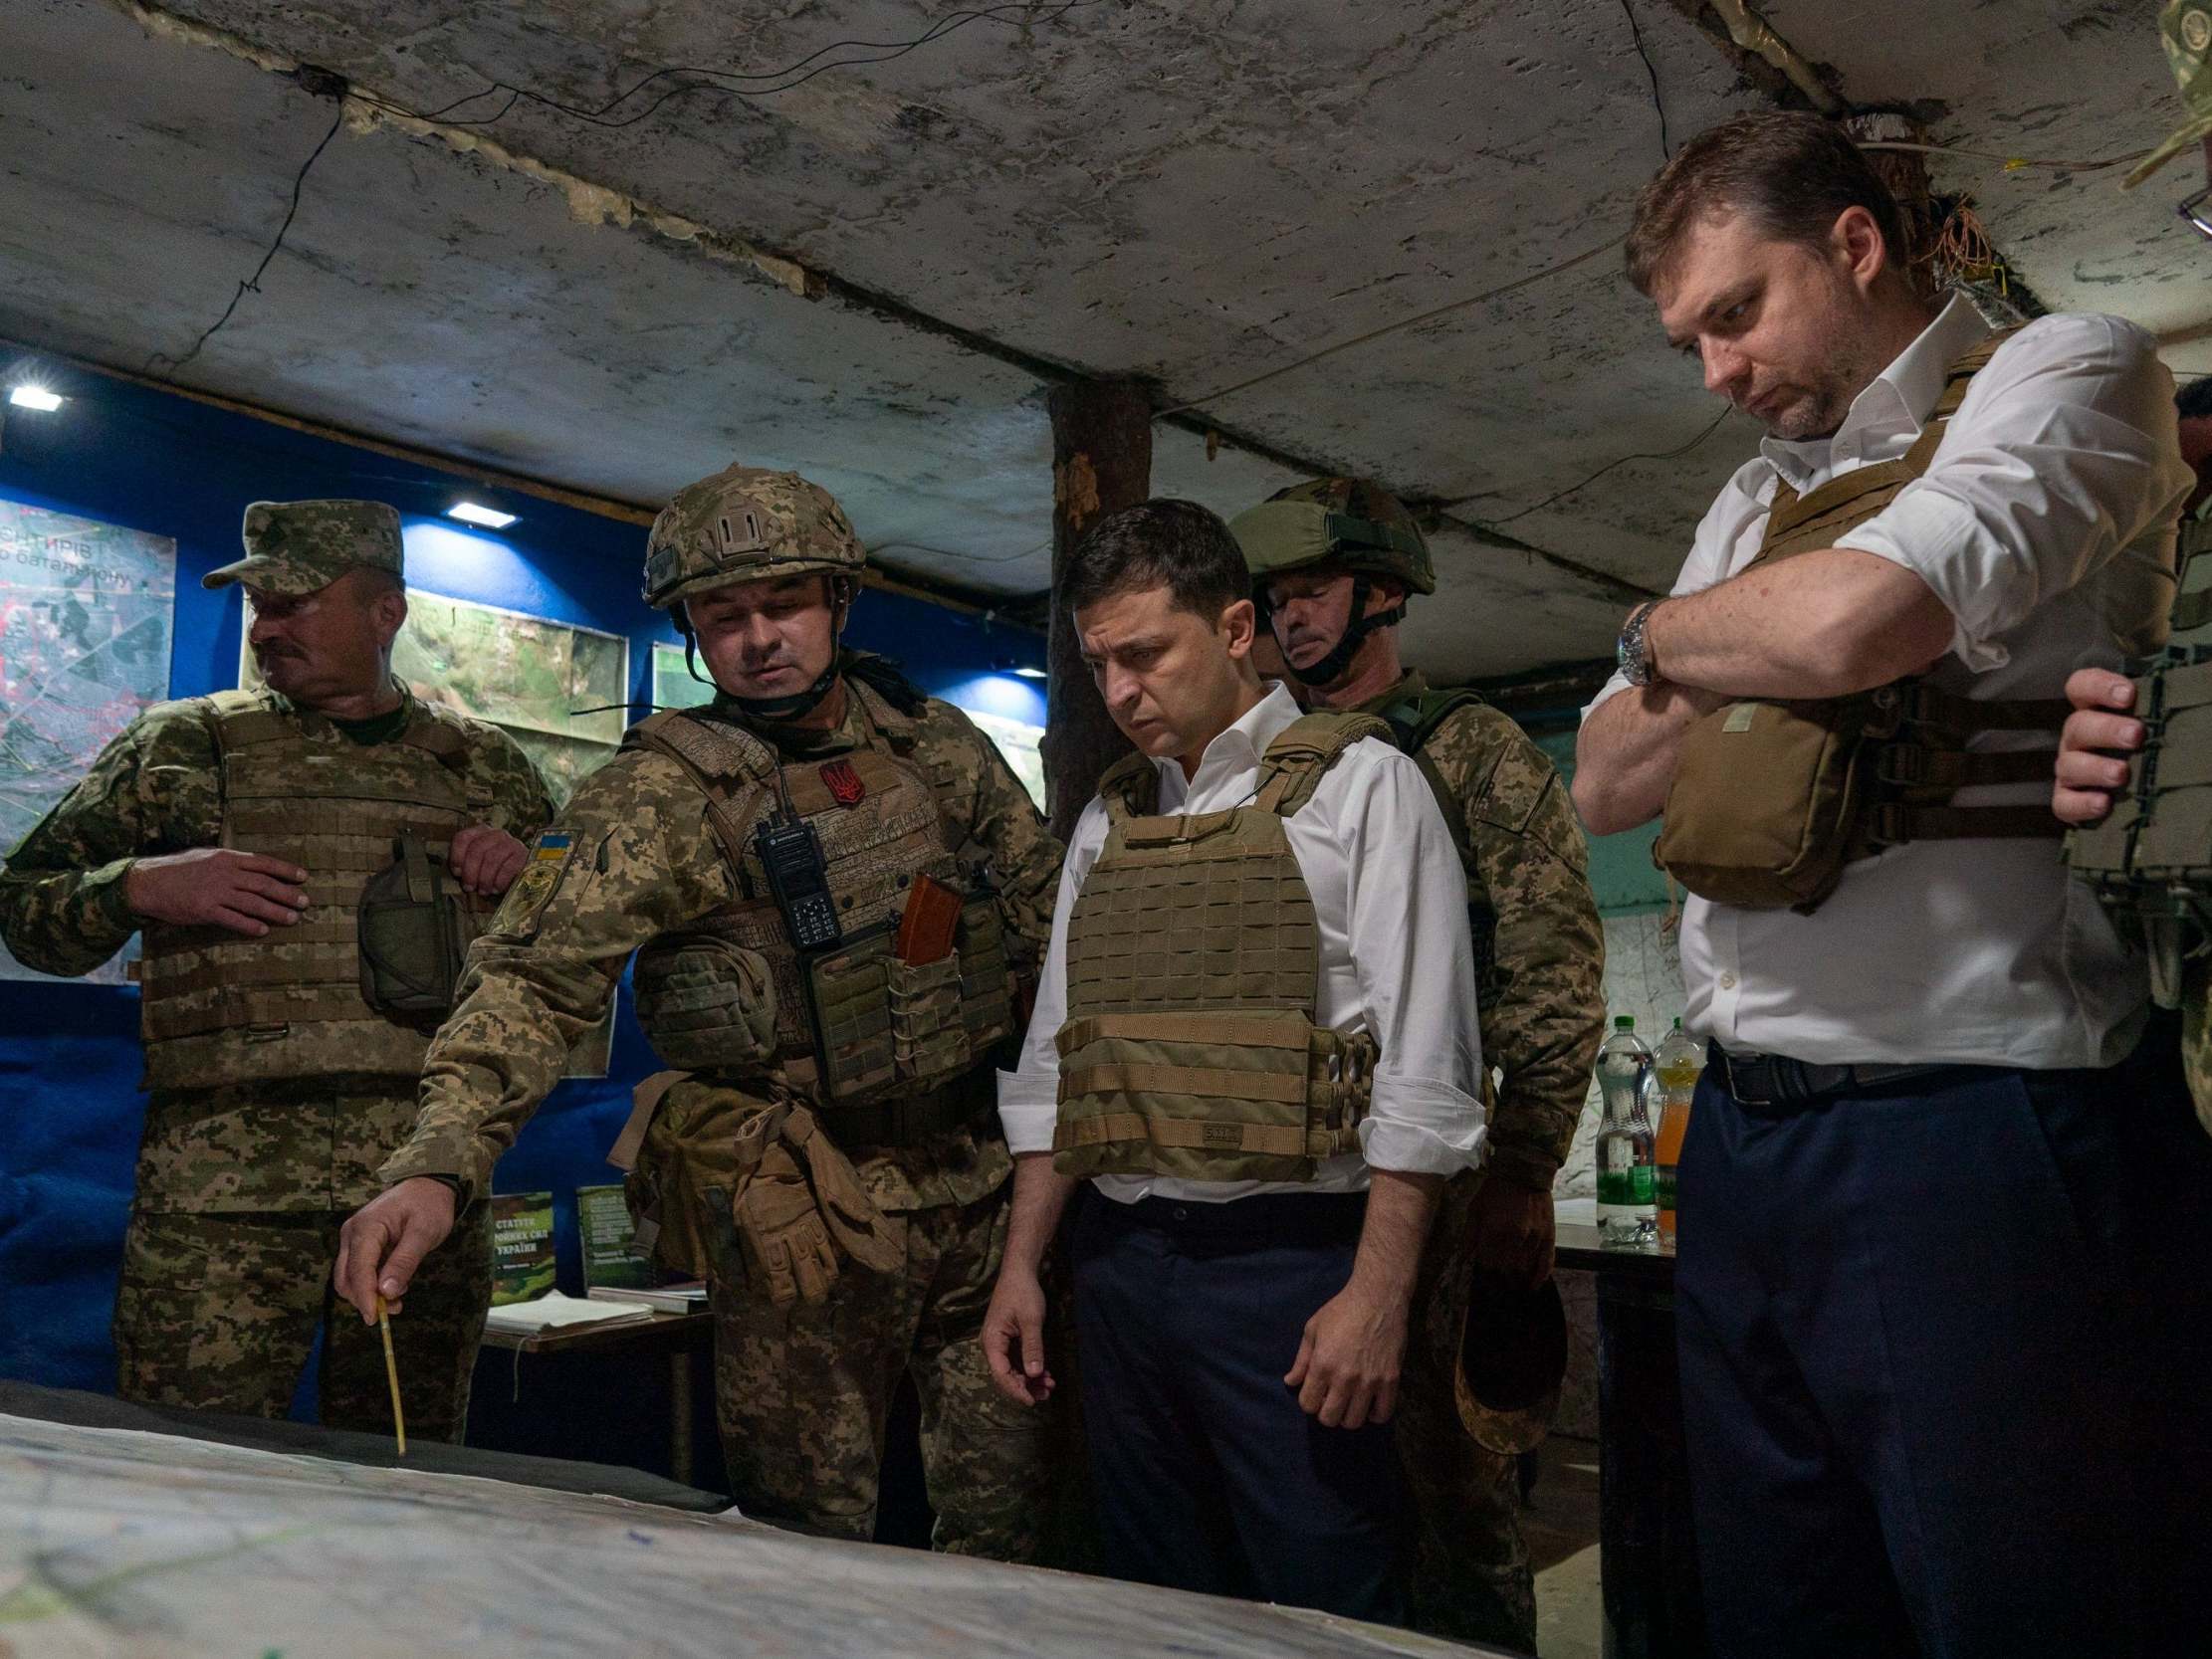 Volodymyr Zelensky (centre) talking with officers at a map during his visit to the Donetsk region